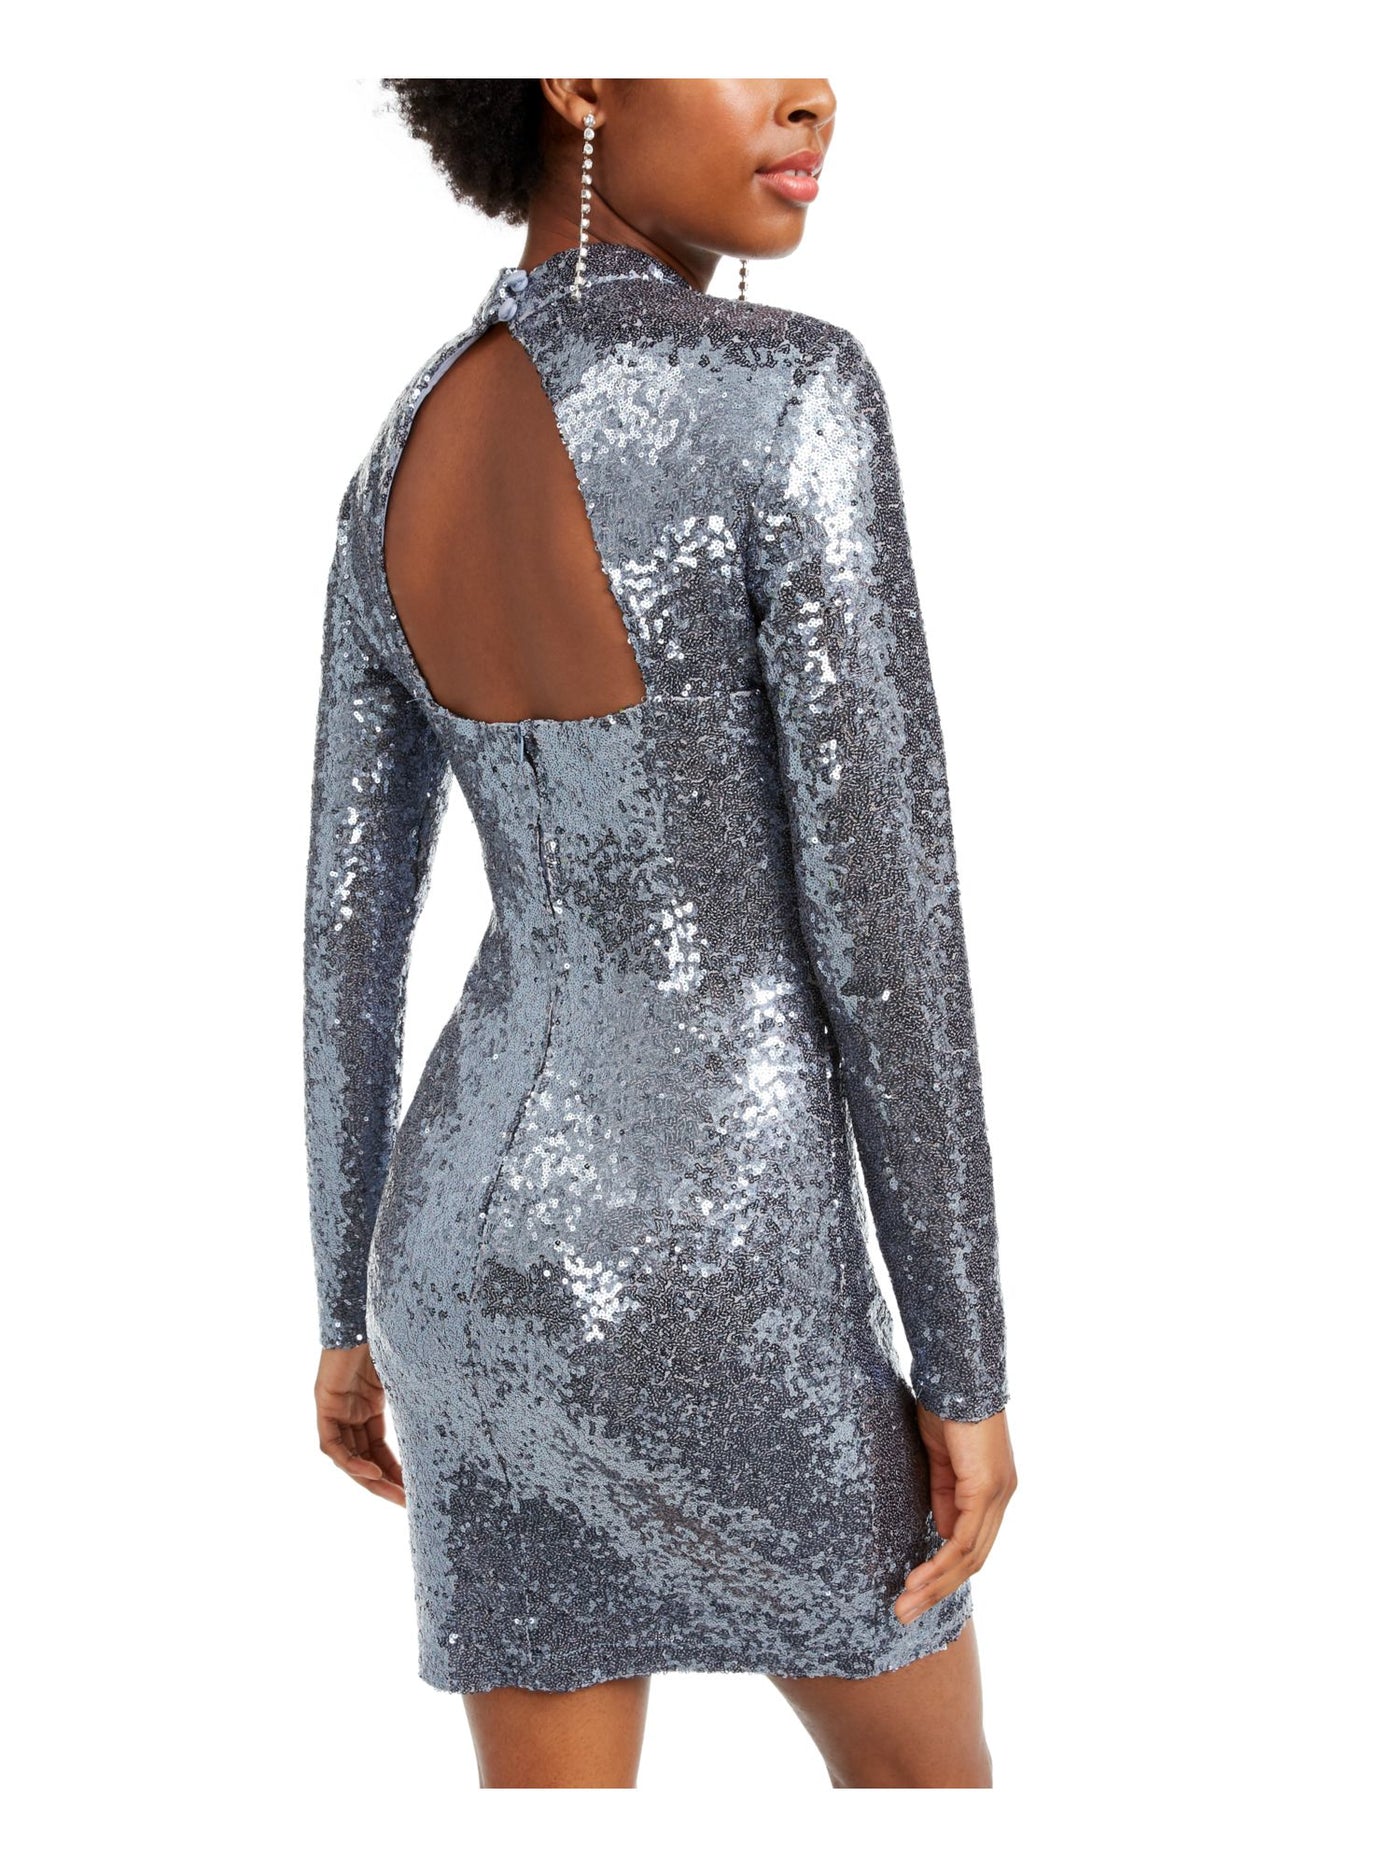 B DARLIN Womens Blue Sequined Cut Out Long Sleeve Mock Neck Short Cocktail Body Con Dress Juniors 13\14